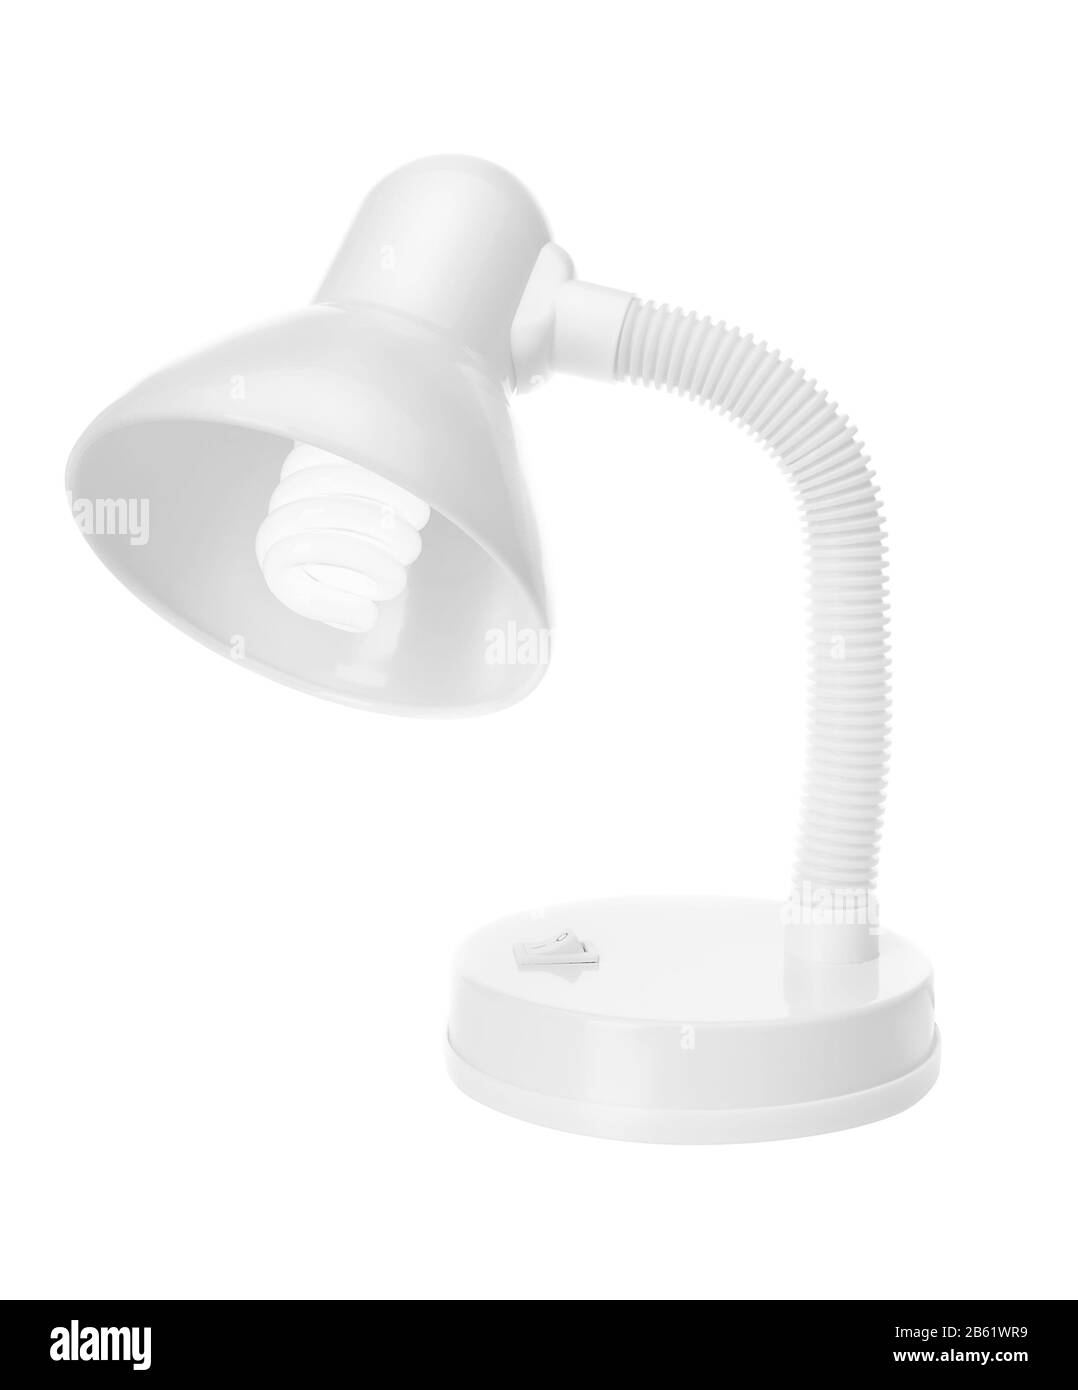 Modern light and economical lamp. On a white background. Stock Photo